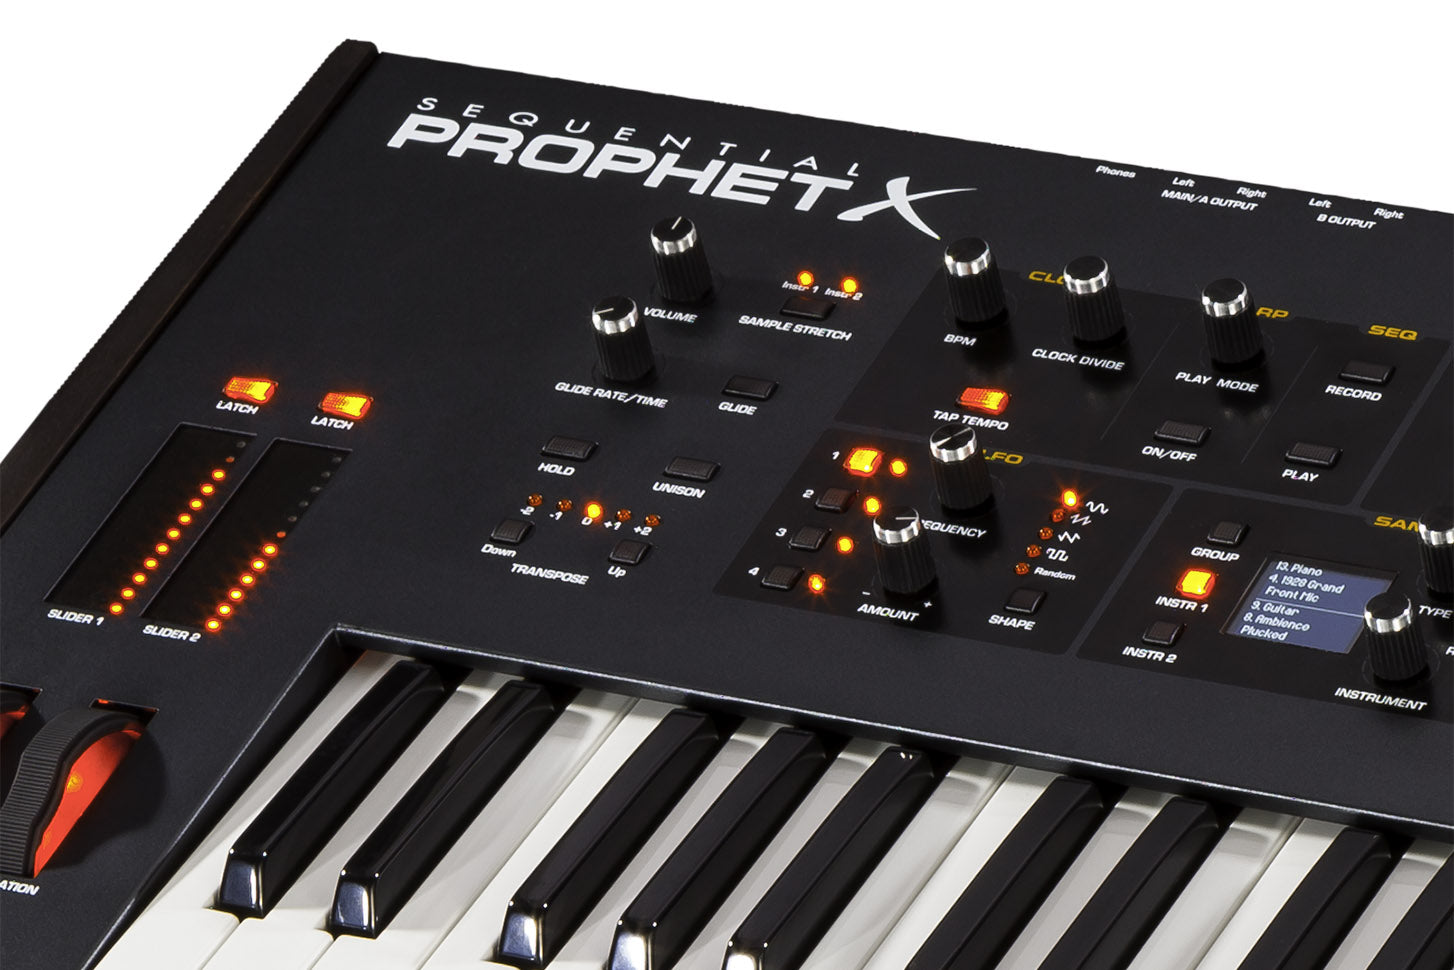 Dave Smith Instruments Announces Sequential Prophet X Synthesizer